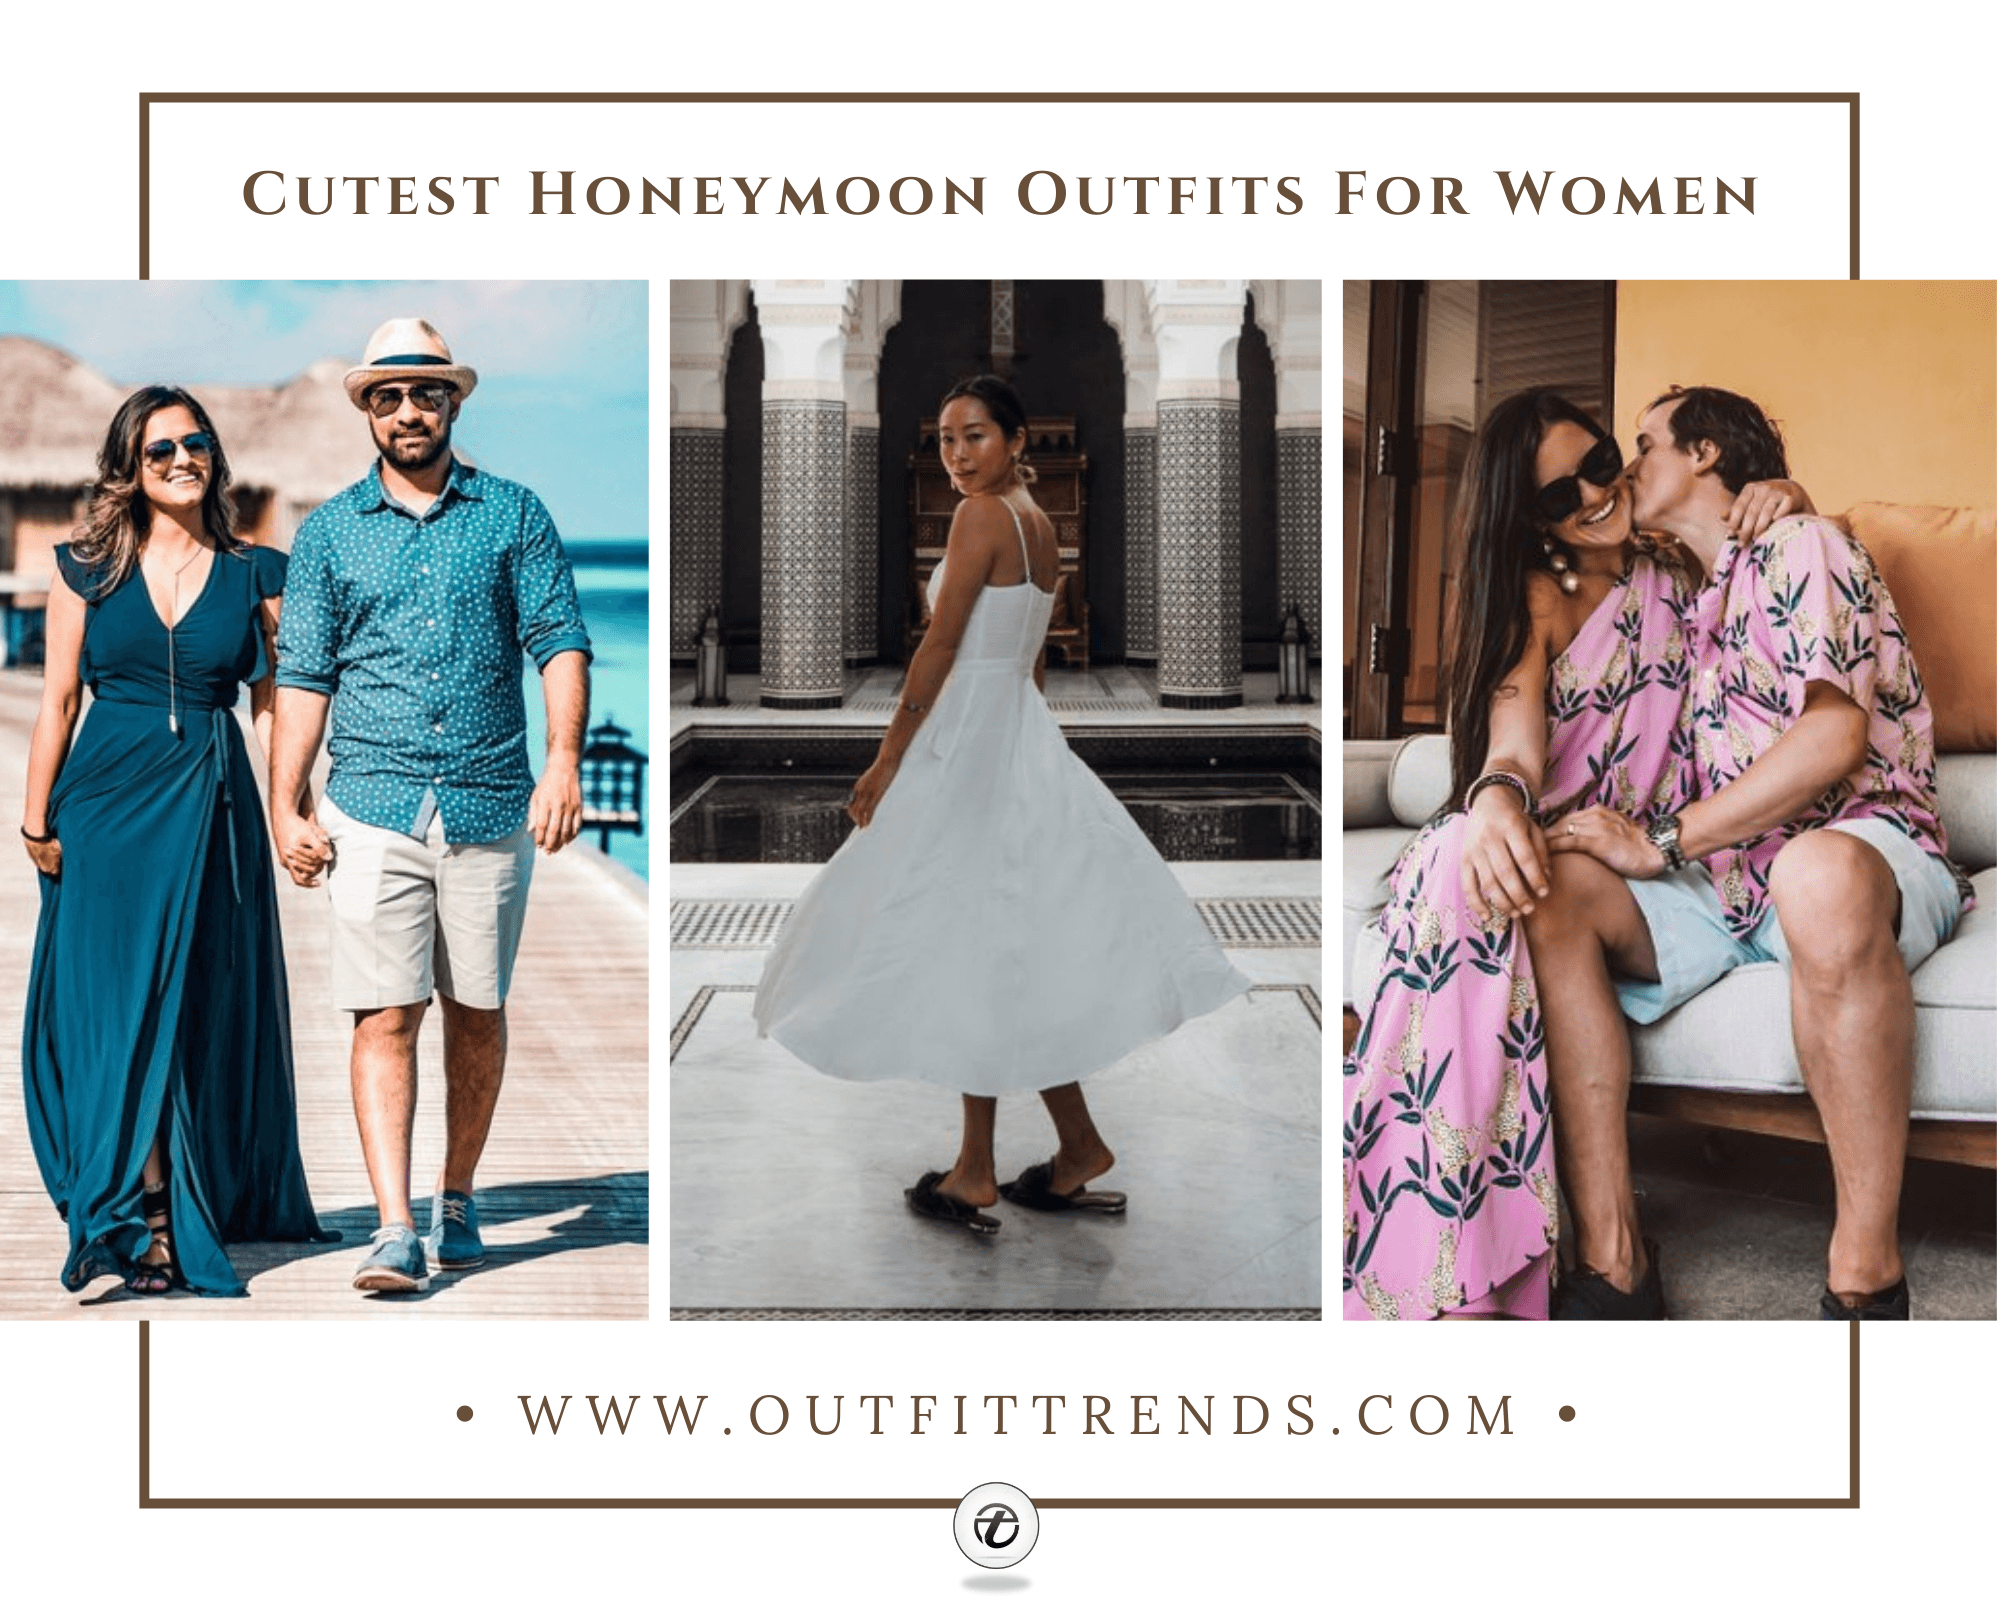 Women Honeymoon Clothes - 23 Outfits to Pack for Honeymoon